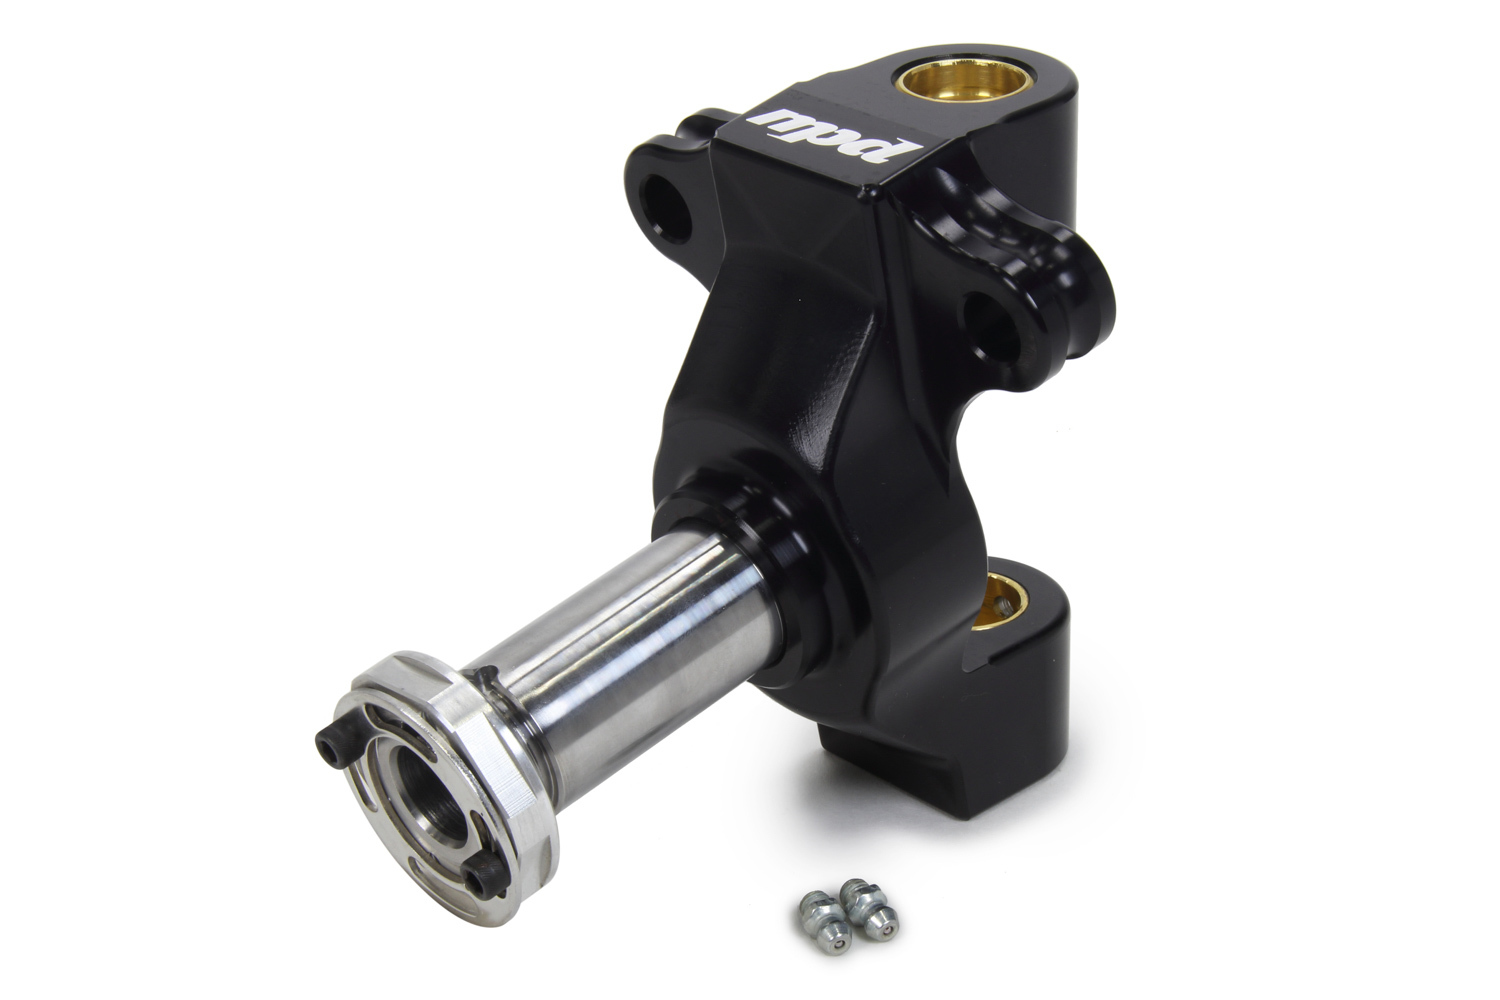 MPD Racing 14000 Spindle, Aluminum Body, 9 Degree Steel Snout, Steel Locknut Included, Aluminum / Steel, Black Anodized / Natural, Sprint Car, Each